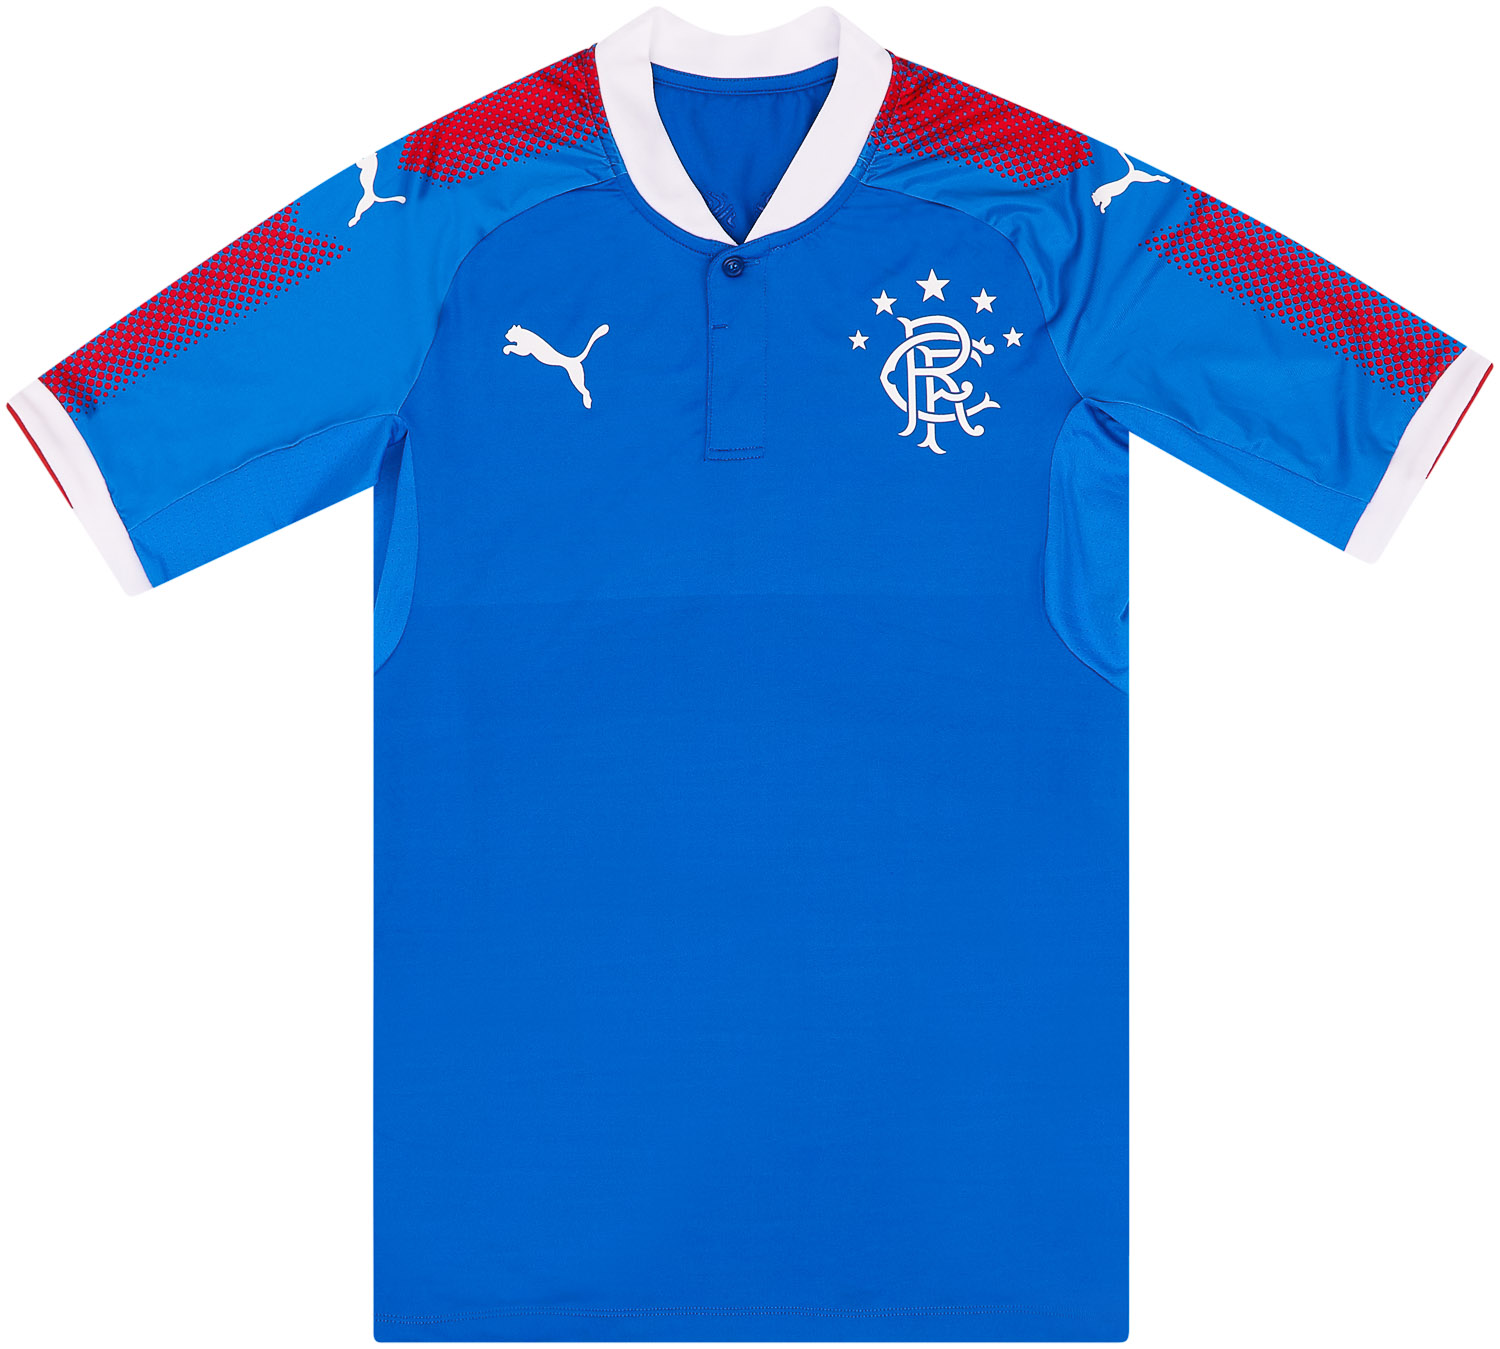 2016-17 Rangers Home Prototype Player Issue Shirt - 8/10 - ()